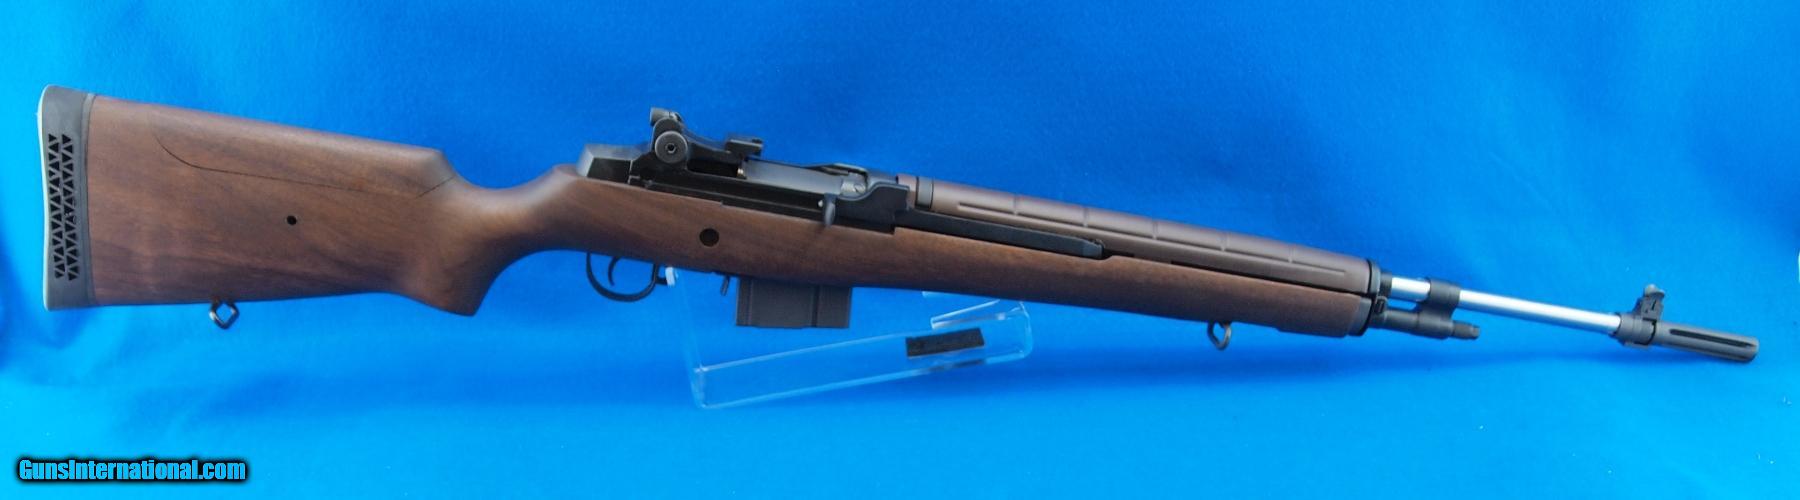 Springfield armory m1a super match review